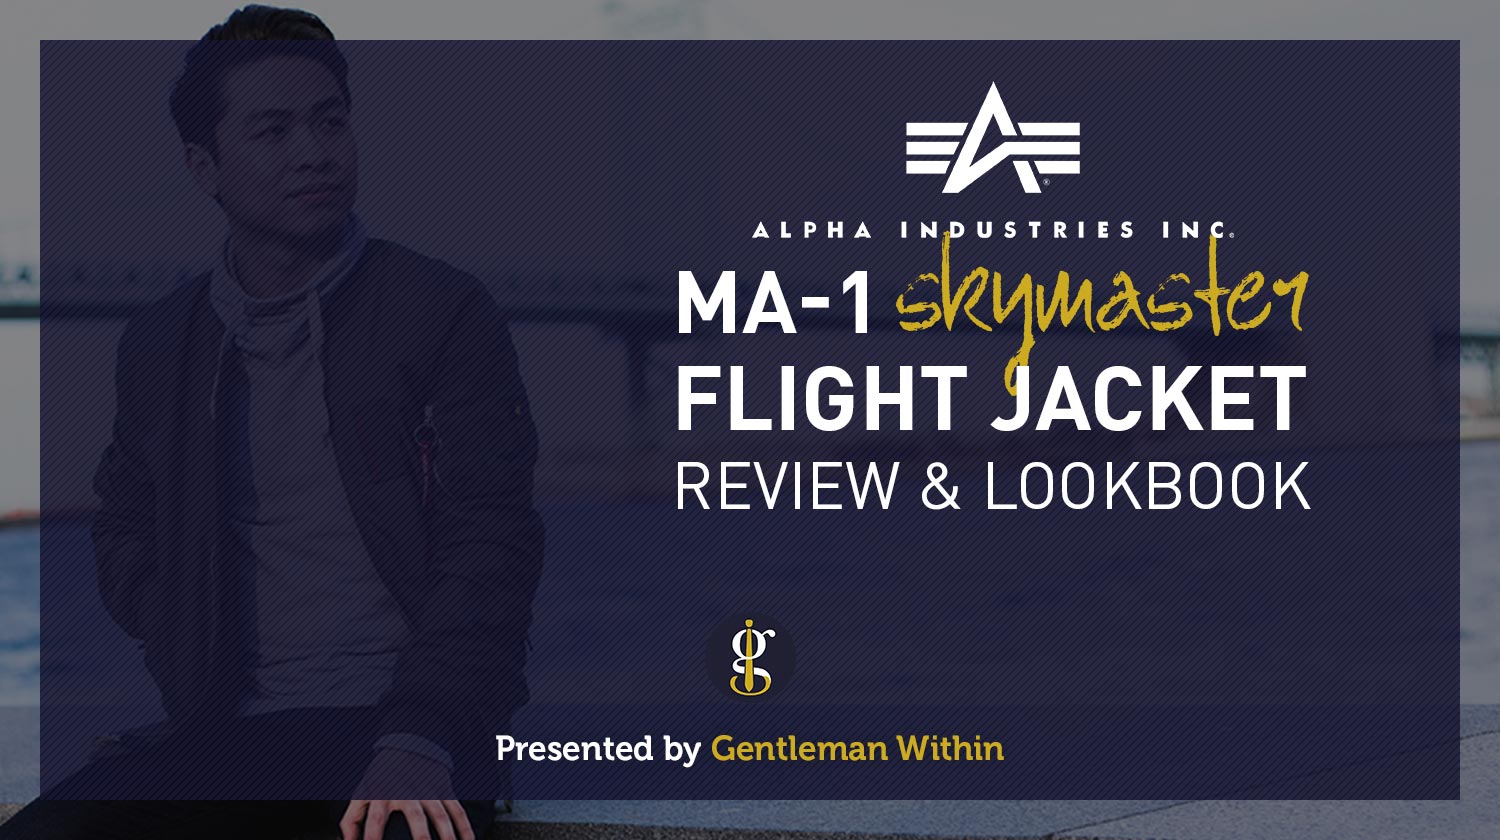 Alpha Industries MA-1 Flight Jacket Review (Pictures and Video) | GENTLEMAN WITHIN